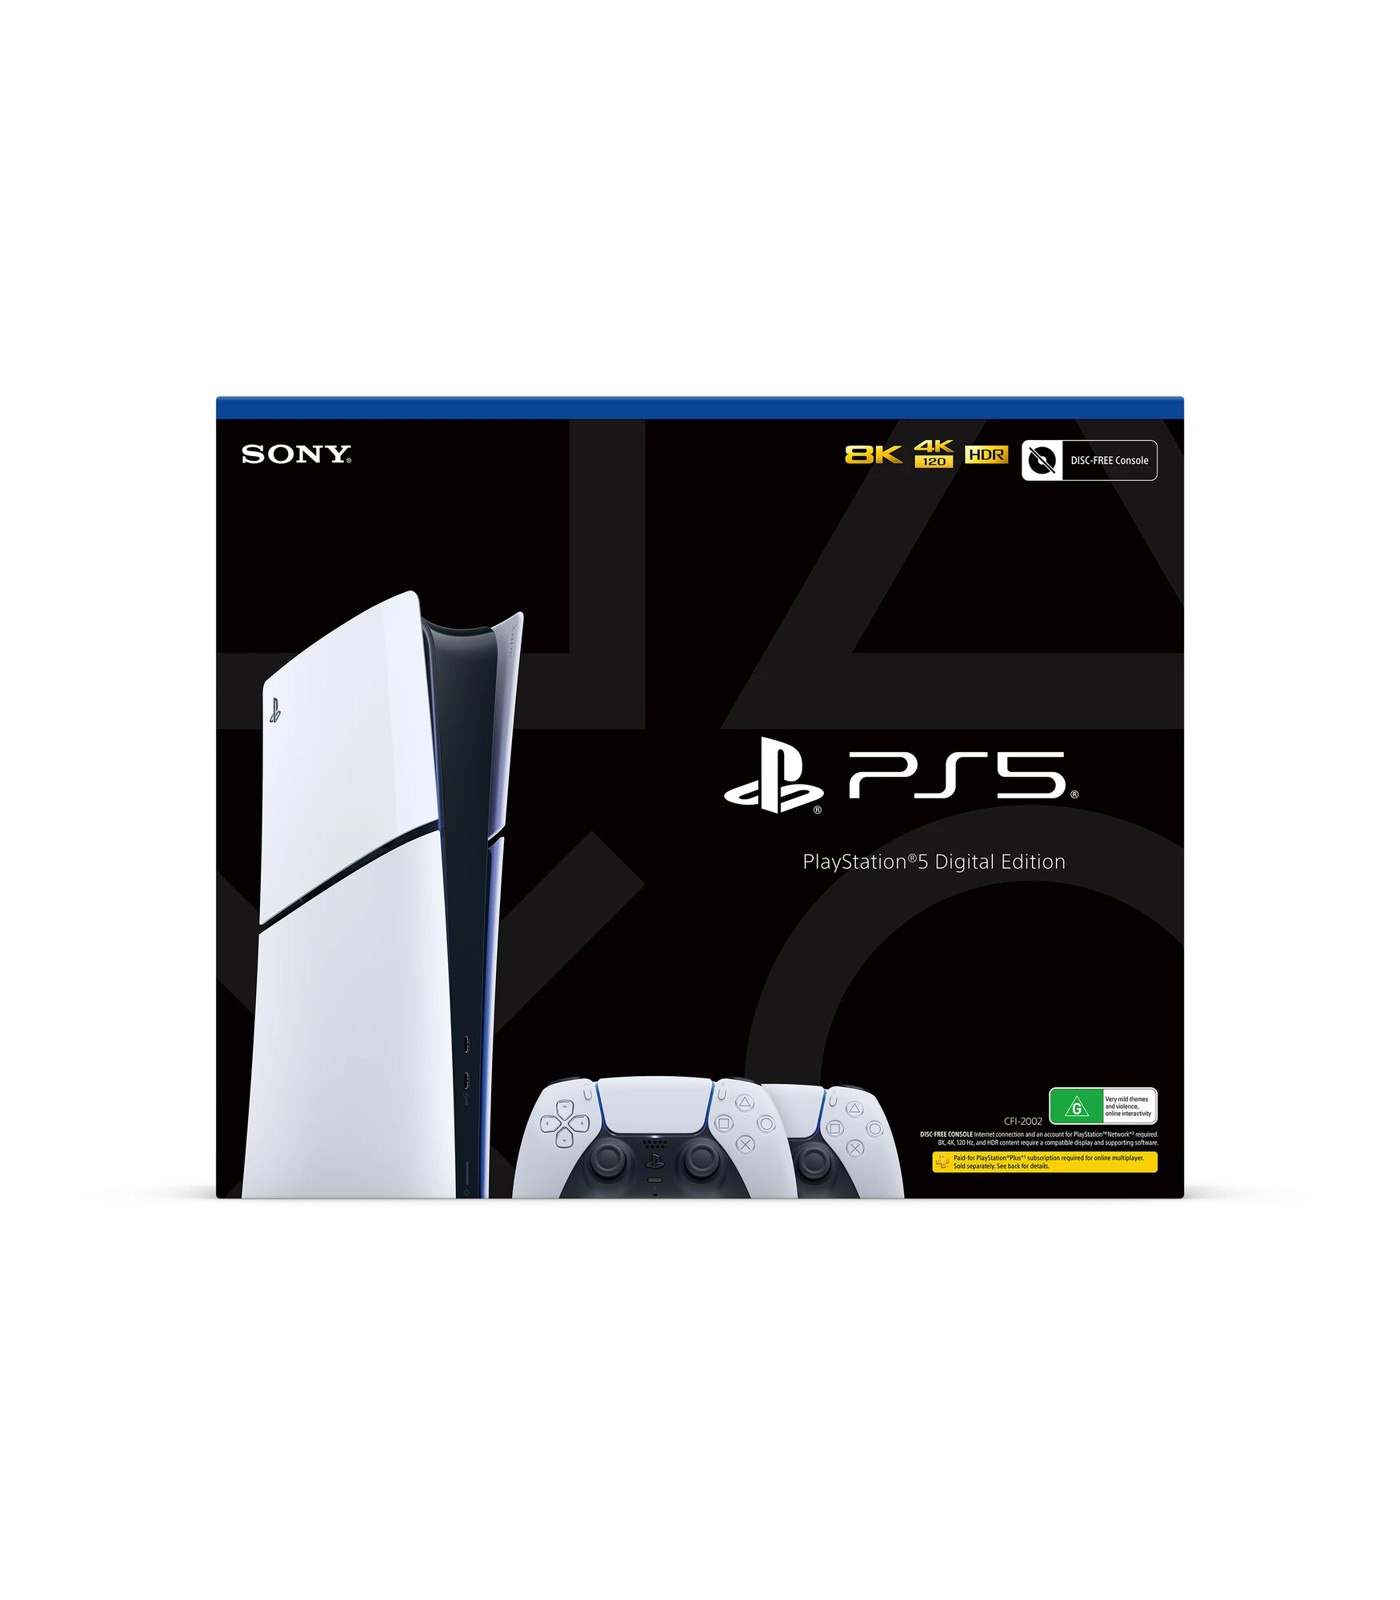 PlayStation 5 Digital Edition (Slim) Console with Two DualSense